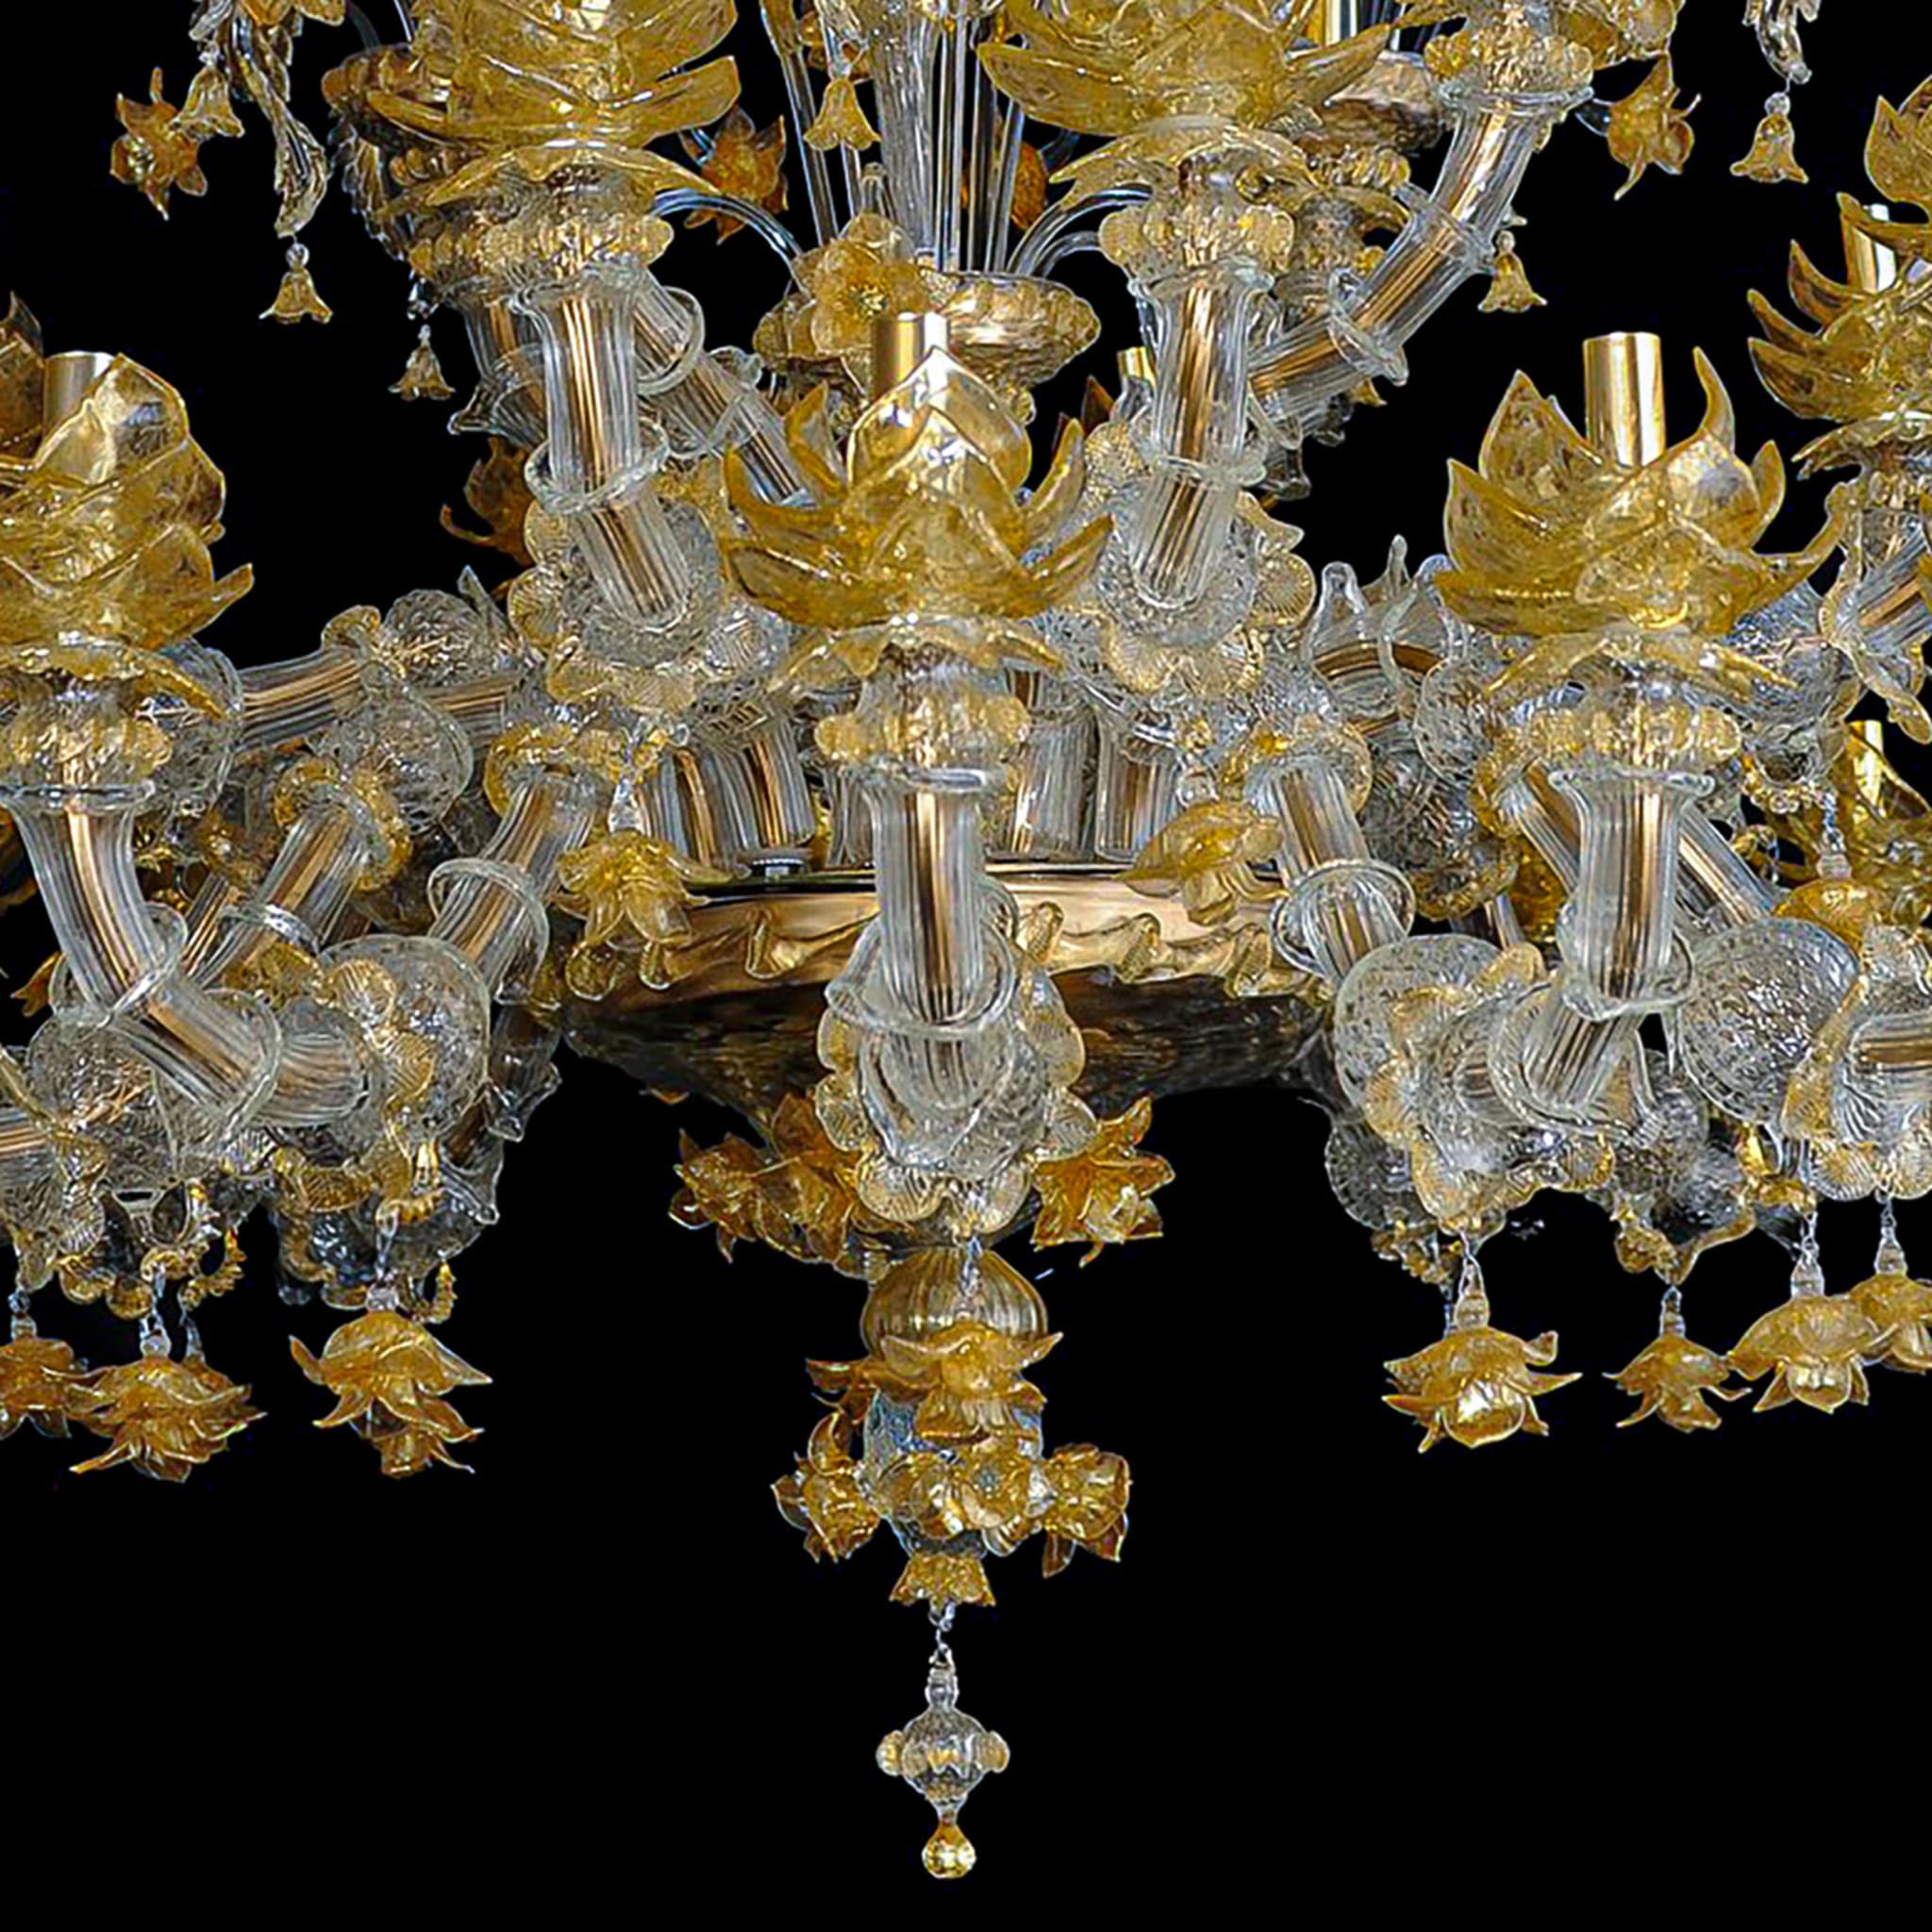 Rezzonico-style Gold and Crystal Chandelier #4 - Alternative view 3